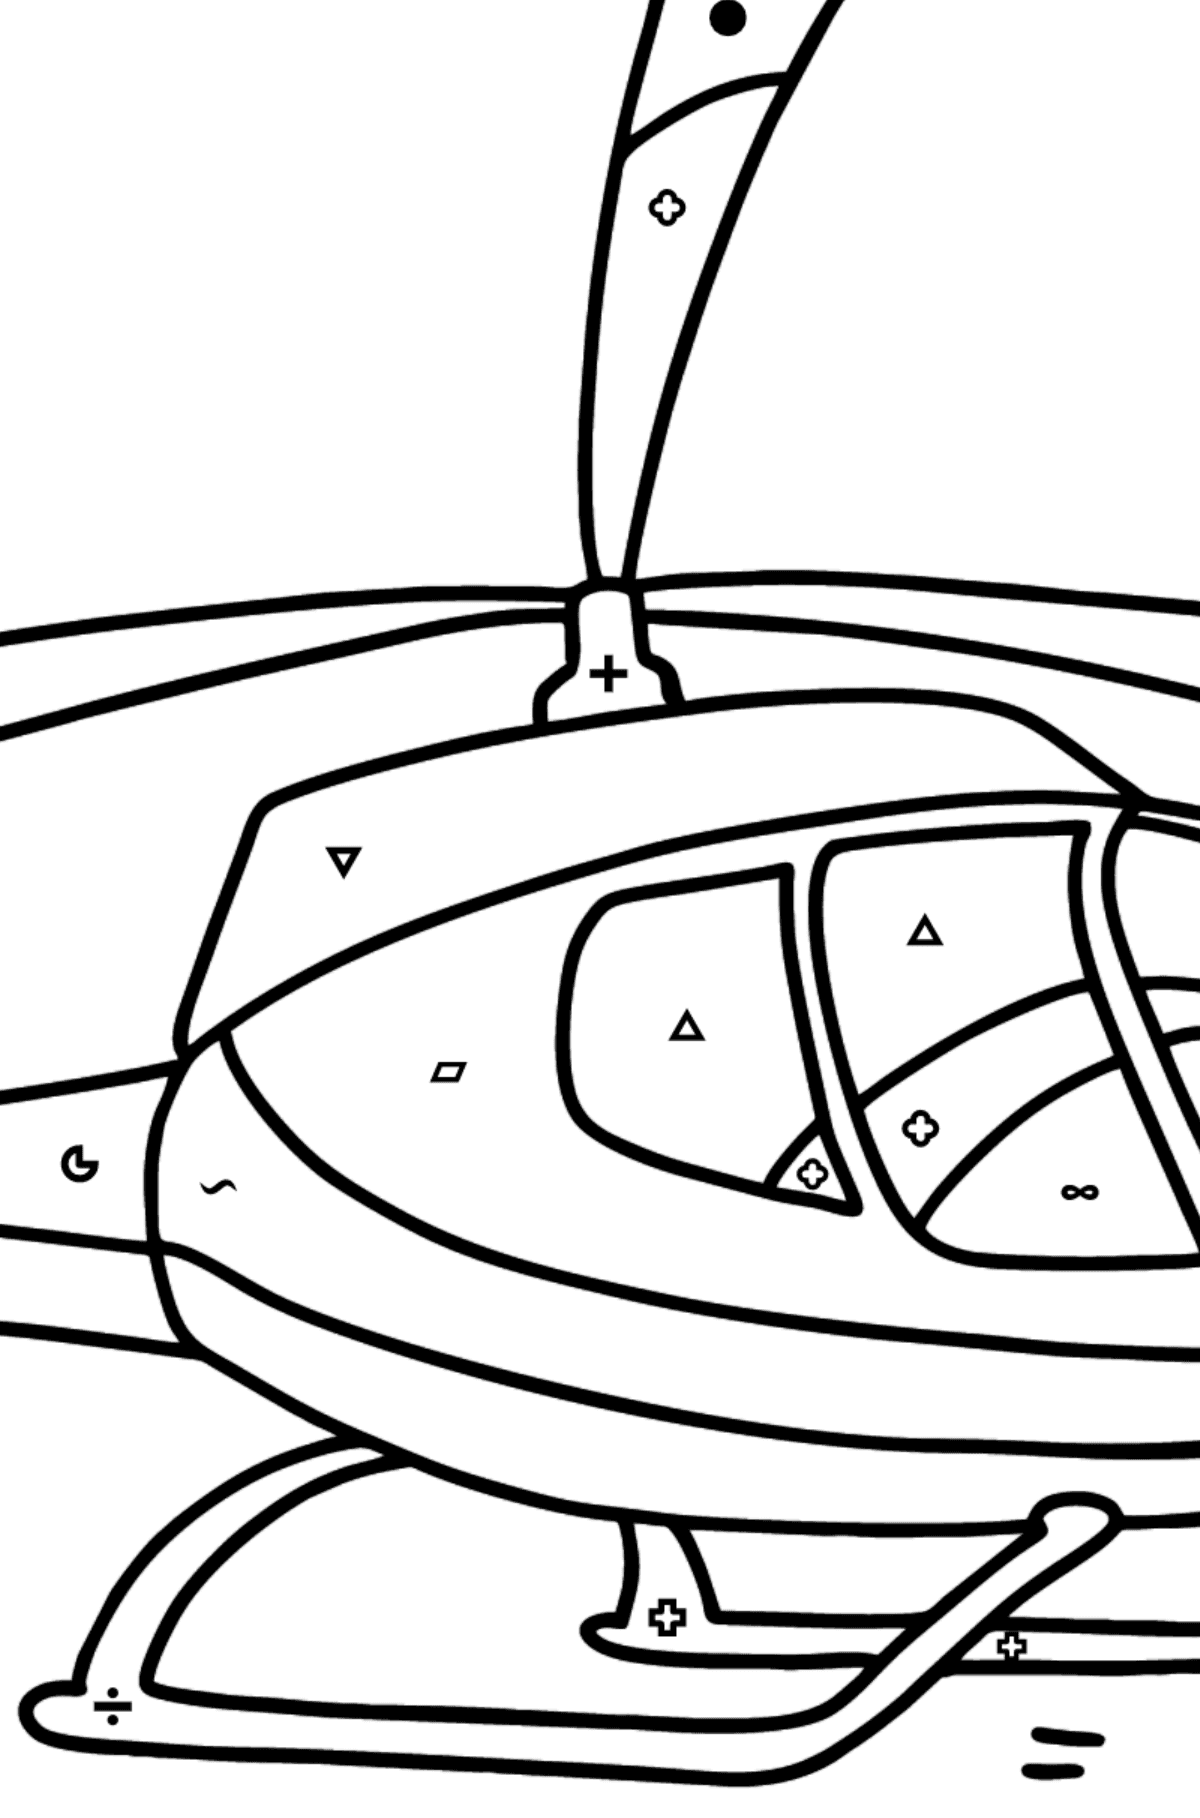 Beautiful Helicopter coloring page - Coloring by Symbols and Geometric Shapes for Kids